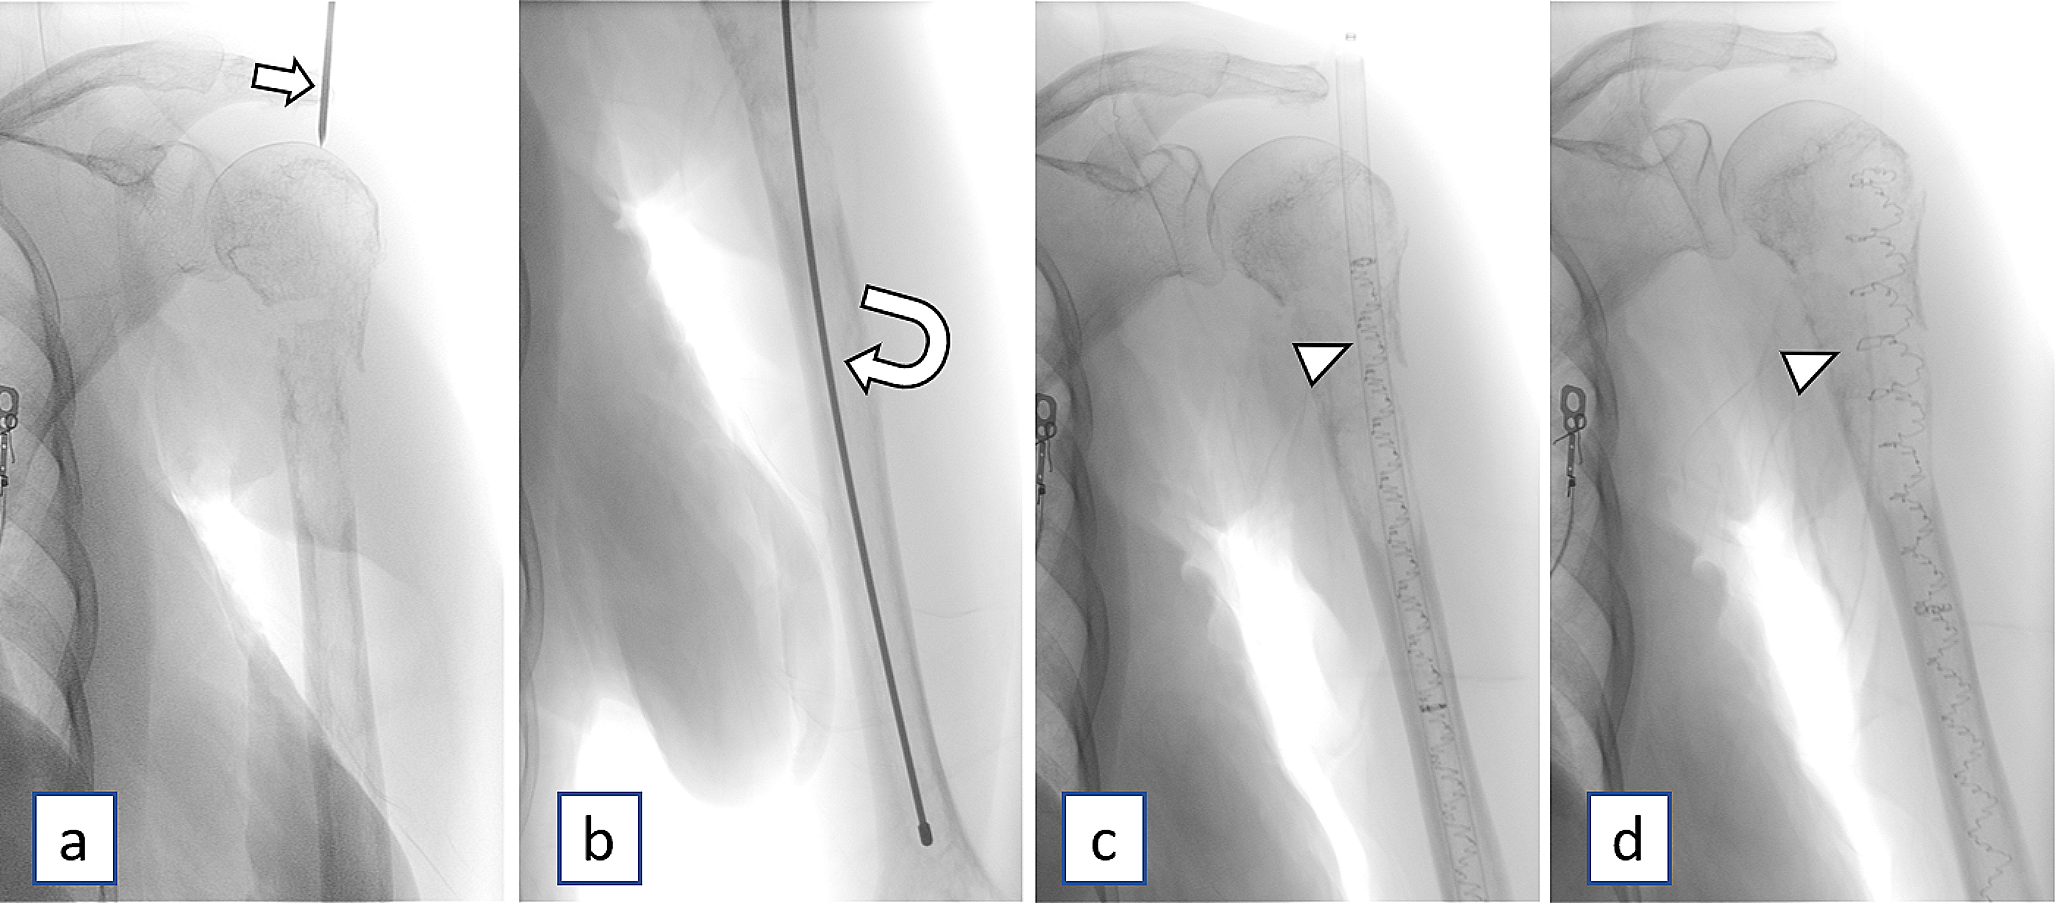 Novel illuminoss photodynamic bone stabilization system: normal and post-operative complication imaging findings in the emergency setting